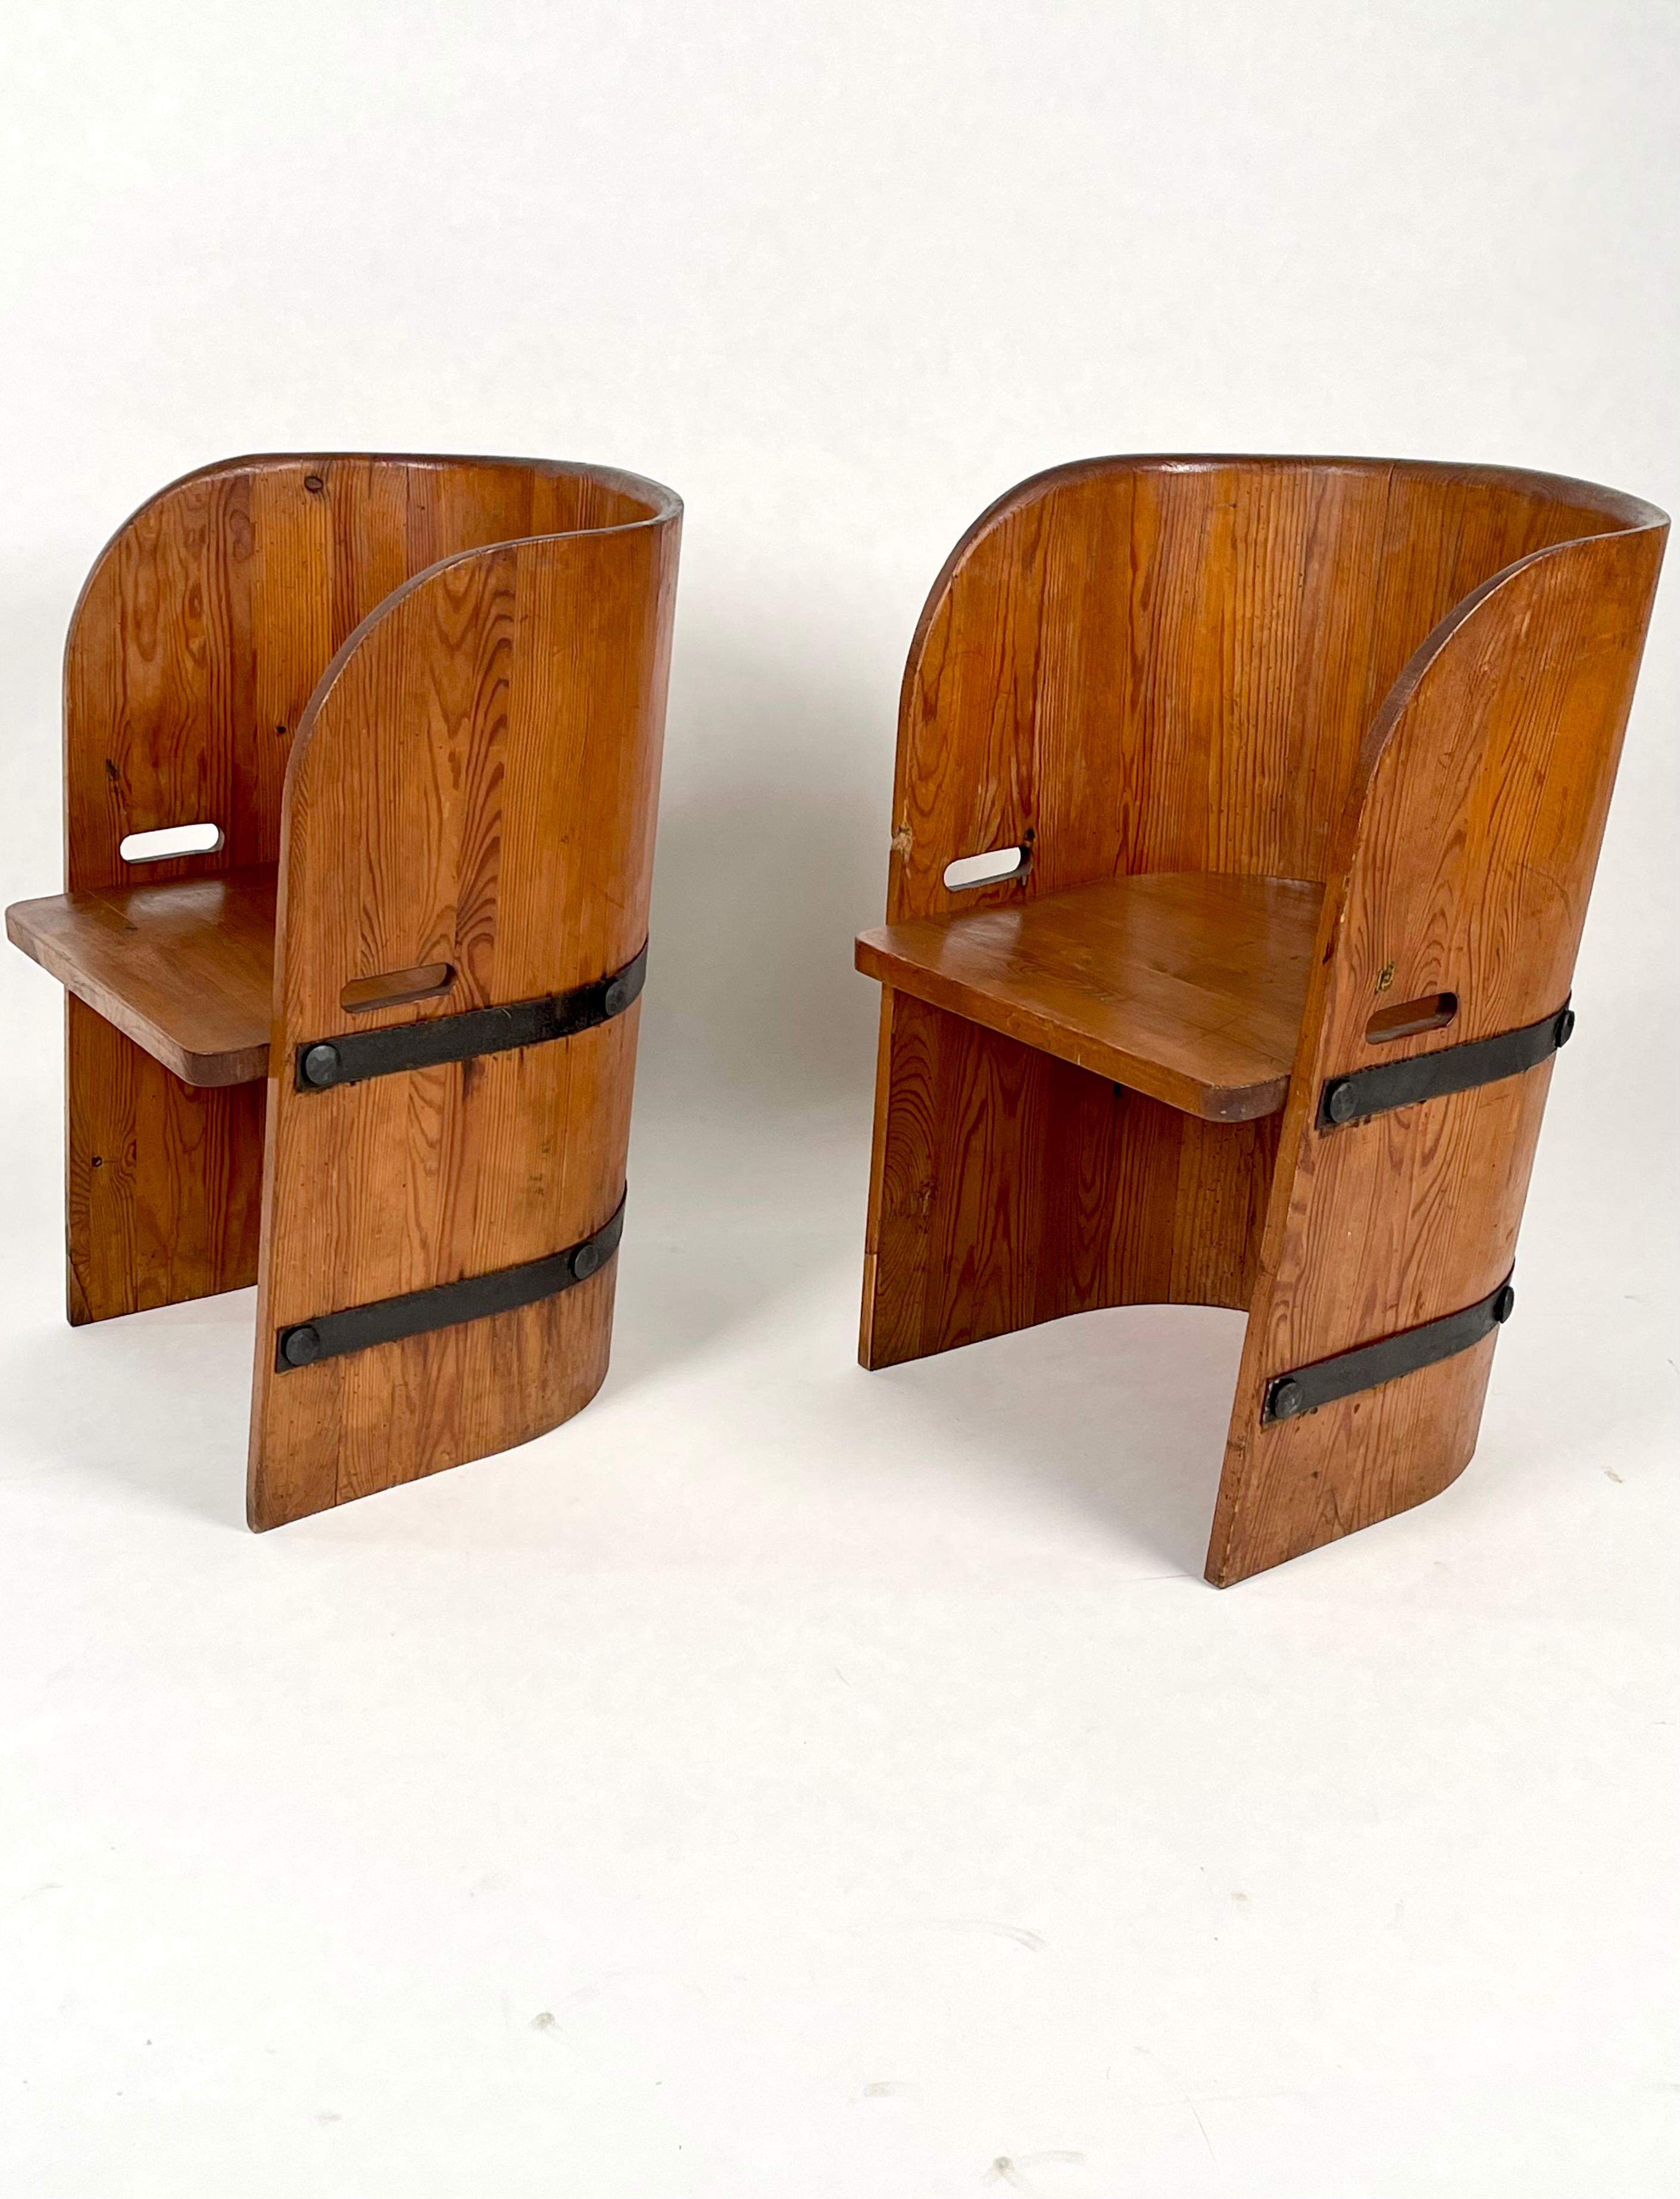 A pair of solid, acid stained pine & forged iron barrel back shaped sports cabin armchairs, Sweden 1930-1940s.
Attributed to Axel-Einar Hjorth, executed by Åby furniture, the company produced for Nordiska Kompaniet, in Stockholm. AEH was the NK